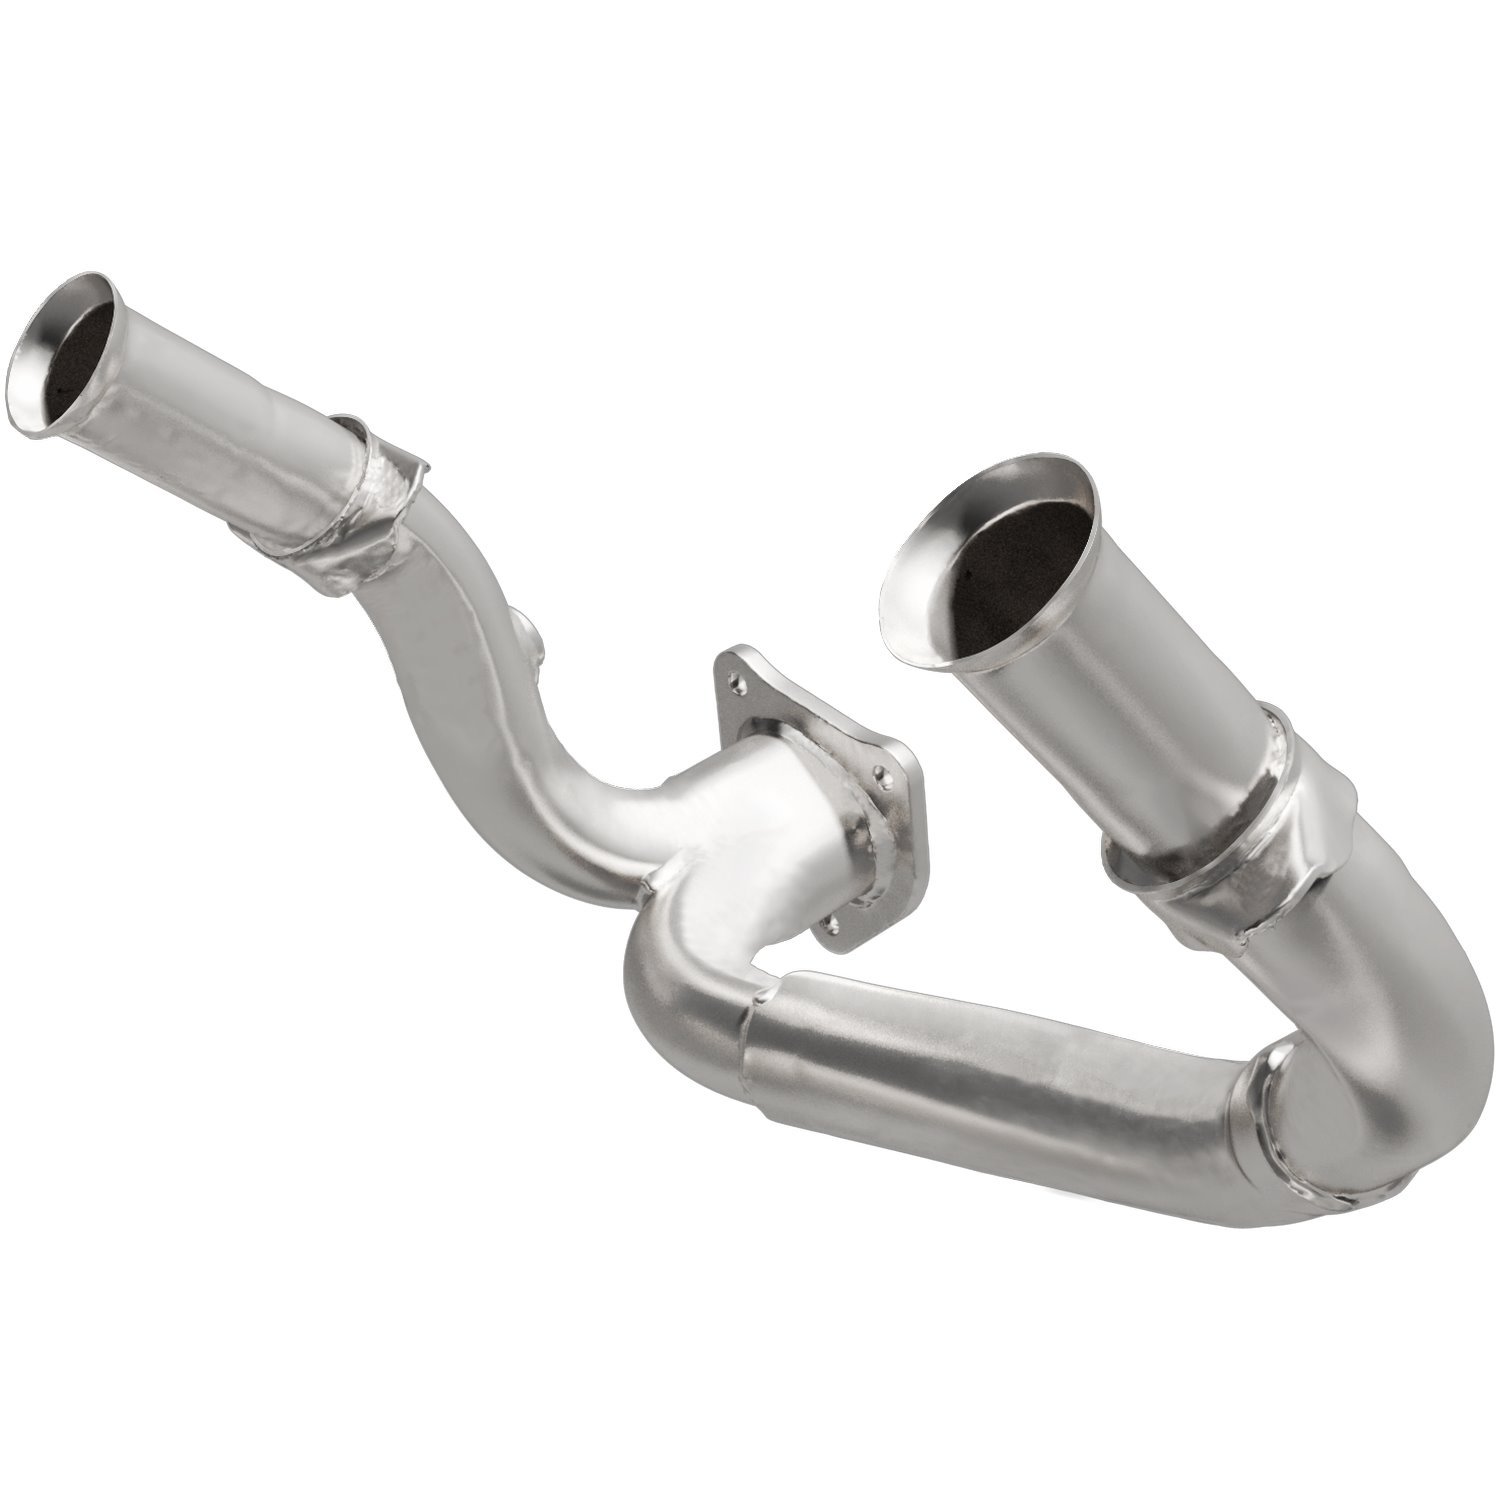 Direct-Fit Exhaust Intermediate Pipe, 1993-1994 Ford Explorer/Ranger 4.0L